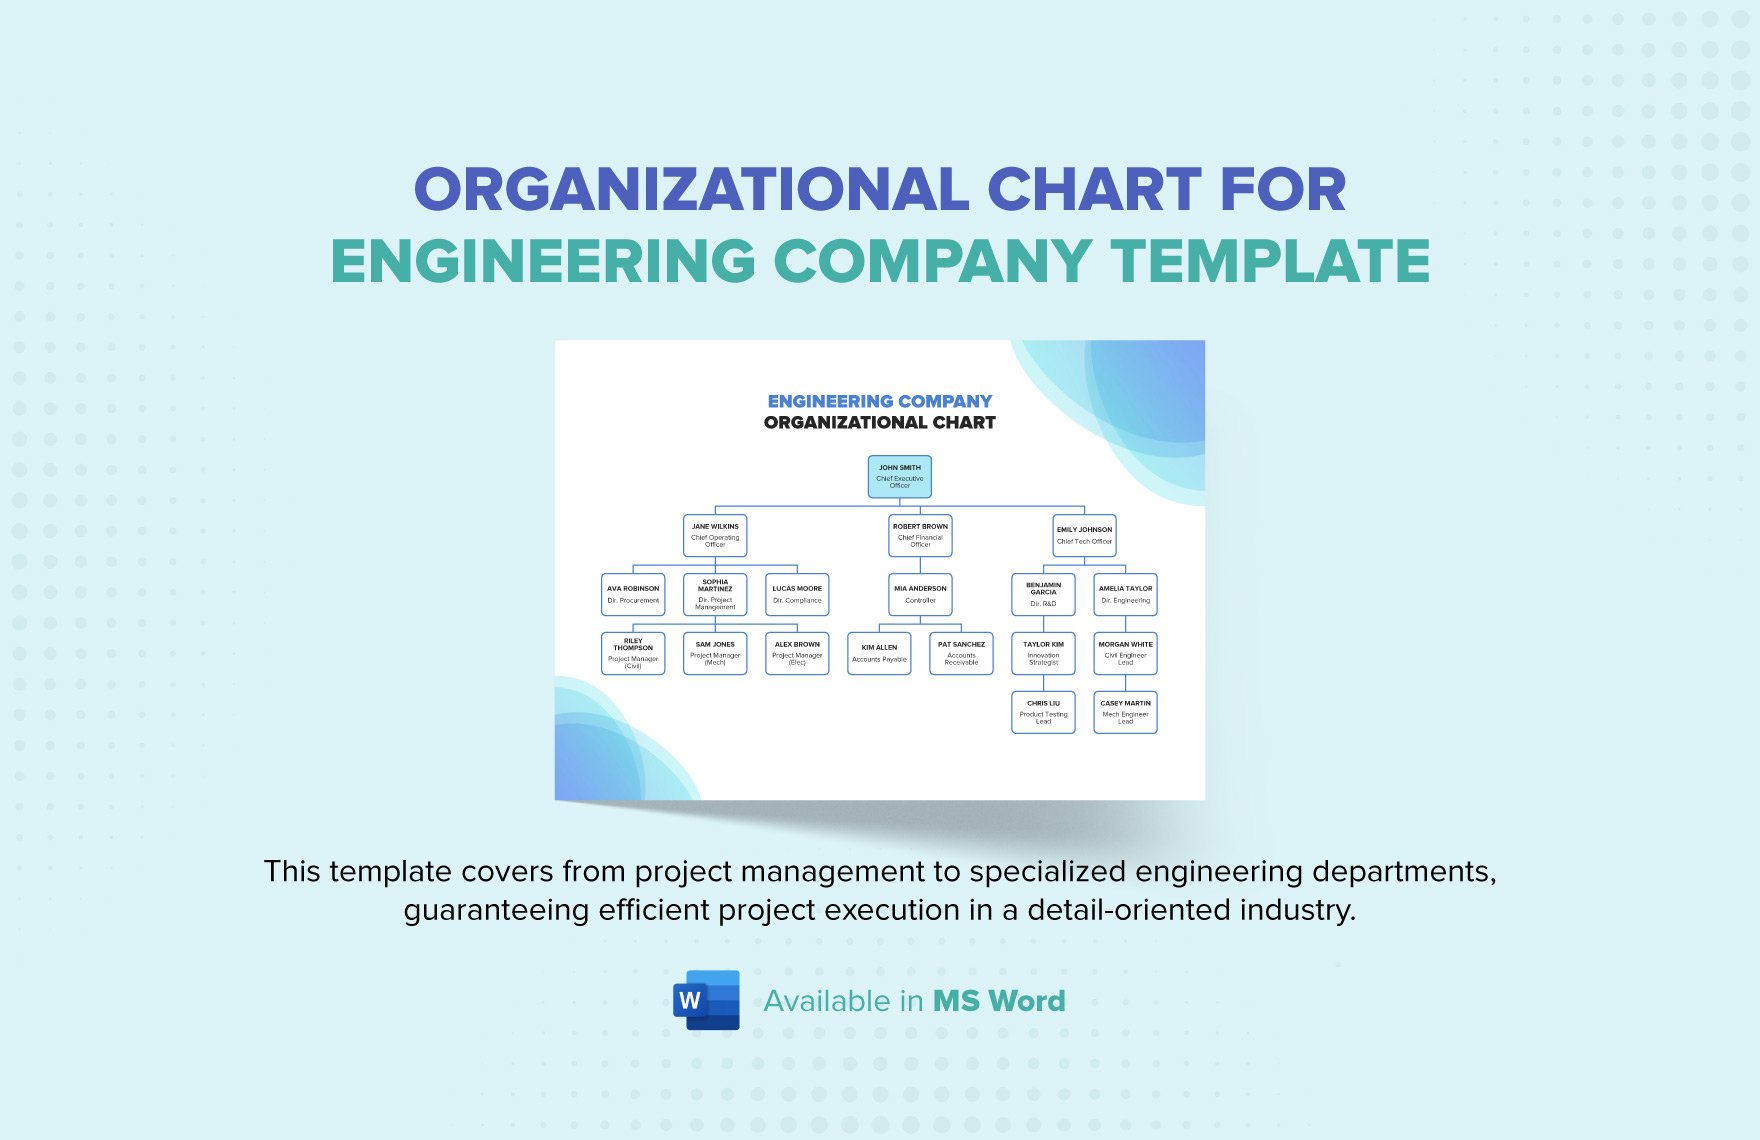 Organizational Chart for Engineering Company Template